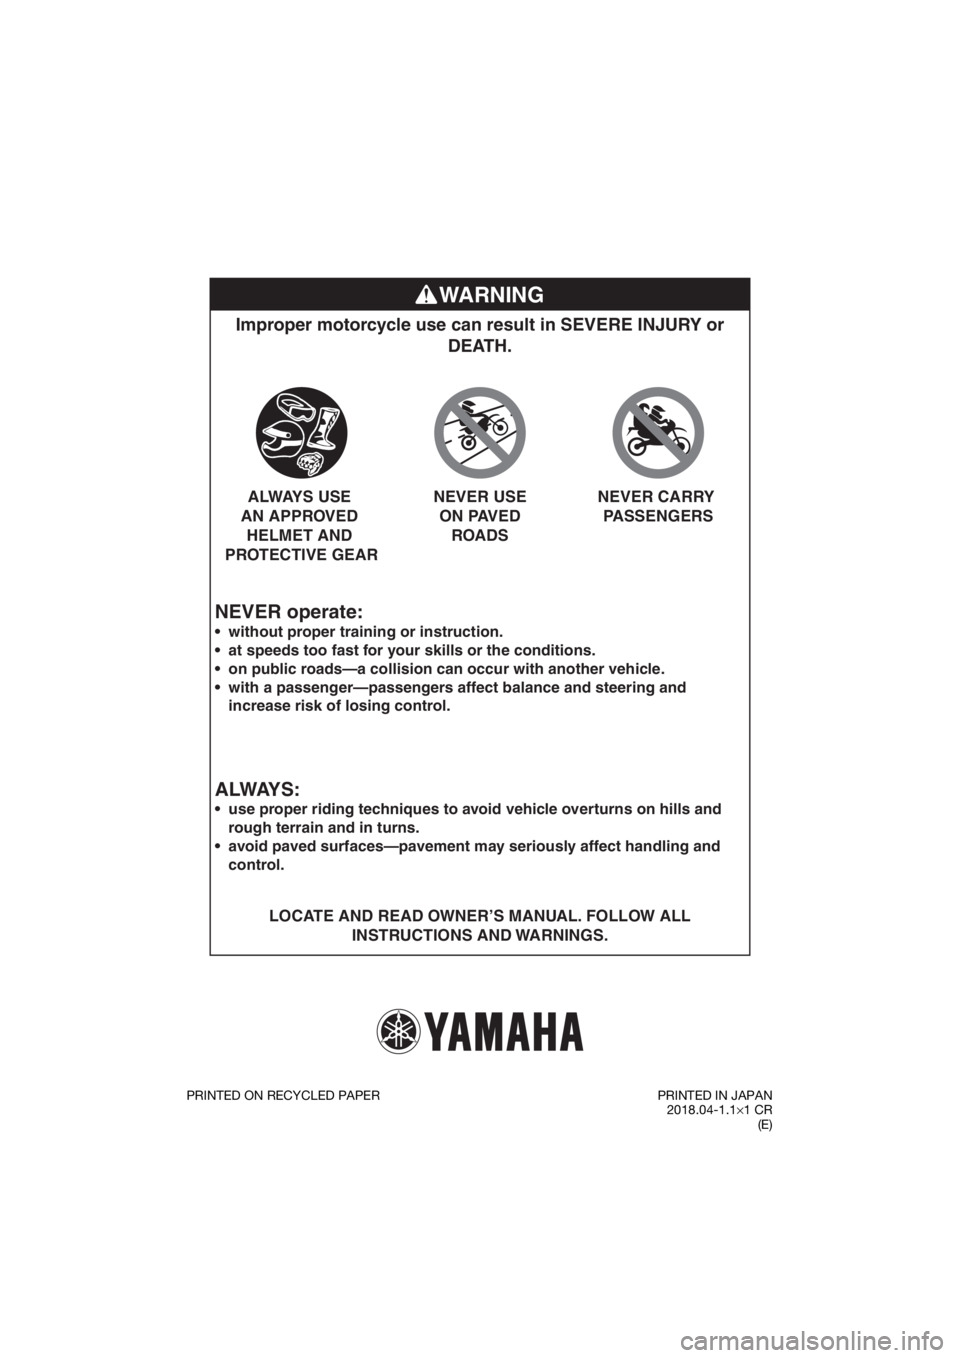 YAMAHA YZ85 2019 Manual Online WARNING
NEVER operate:
Improper motorcycle use can result in SEVERE INJURY or DEATH.
LOCATE AND READ OWNER’S MANUAL. FOLLOW ALL 
INSTRUCTIONS AND WARNINGS.



without proper training or instruction.